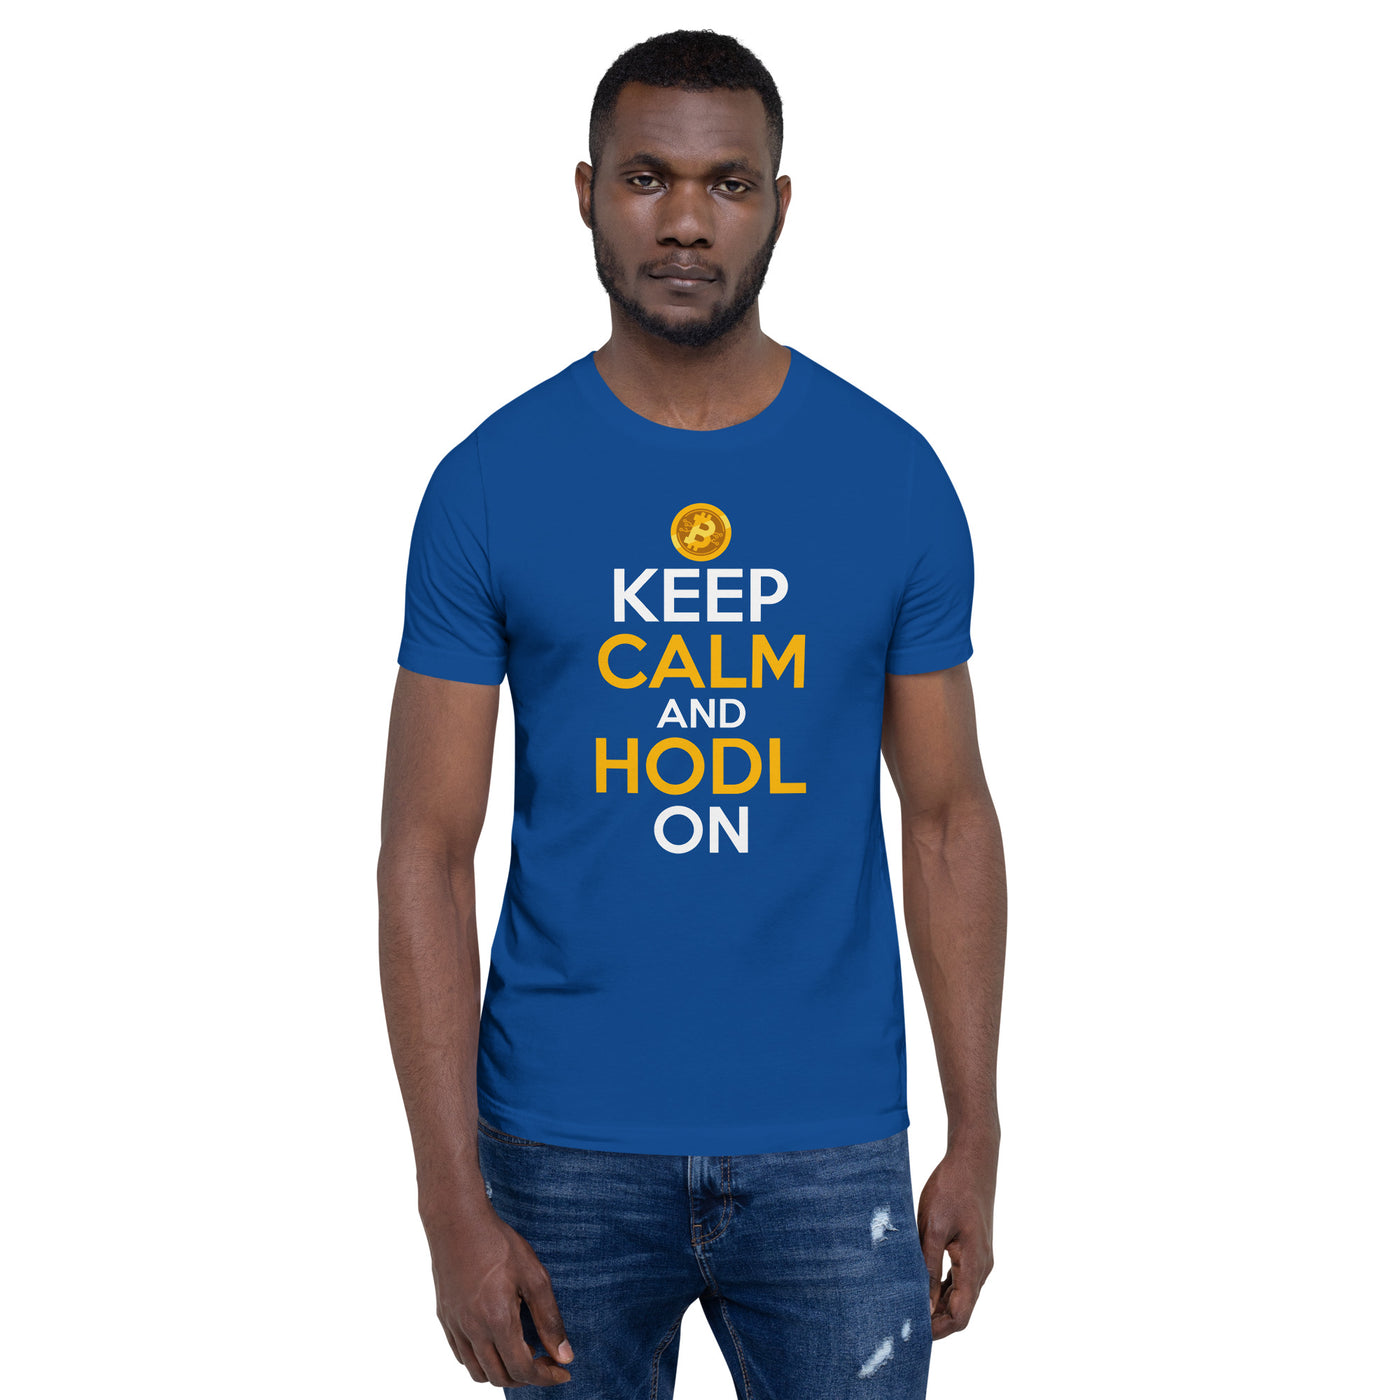 Keep Calm and HODL On ( Yellow and White Text ) - Unisex t-shirt